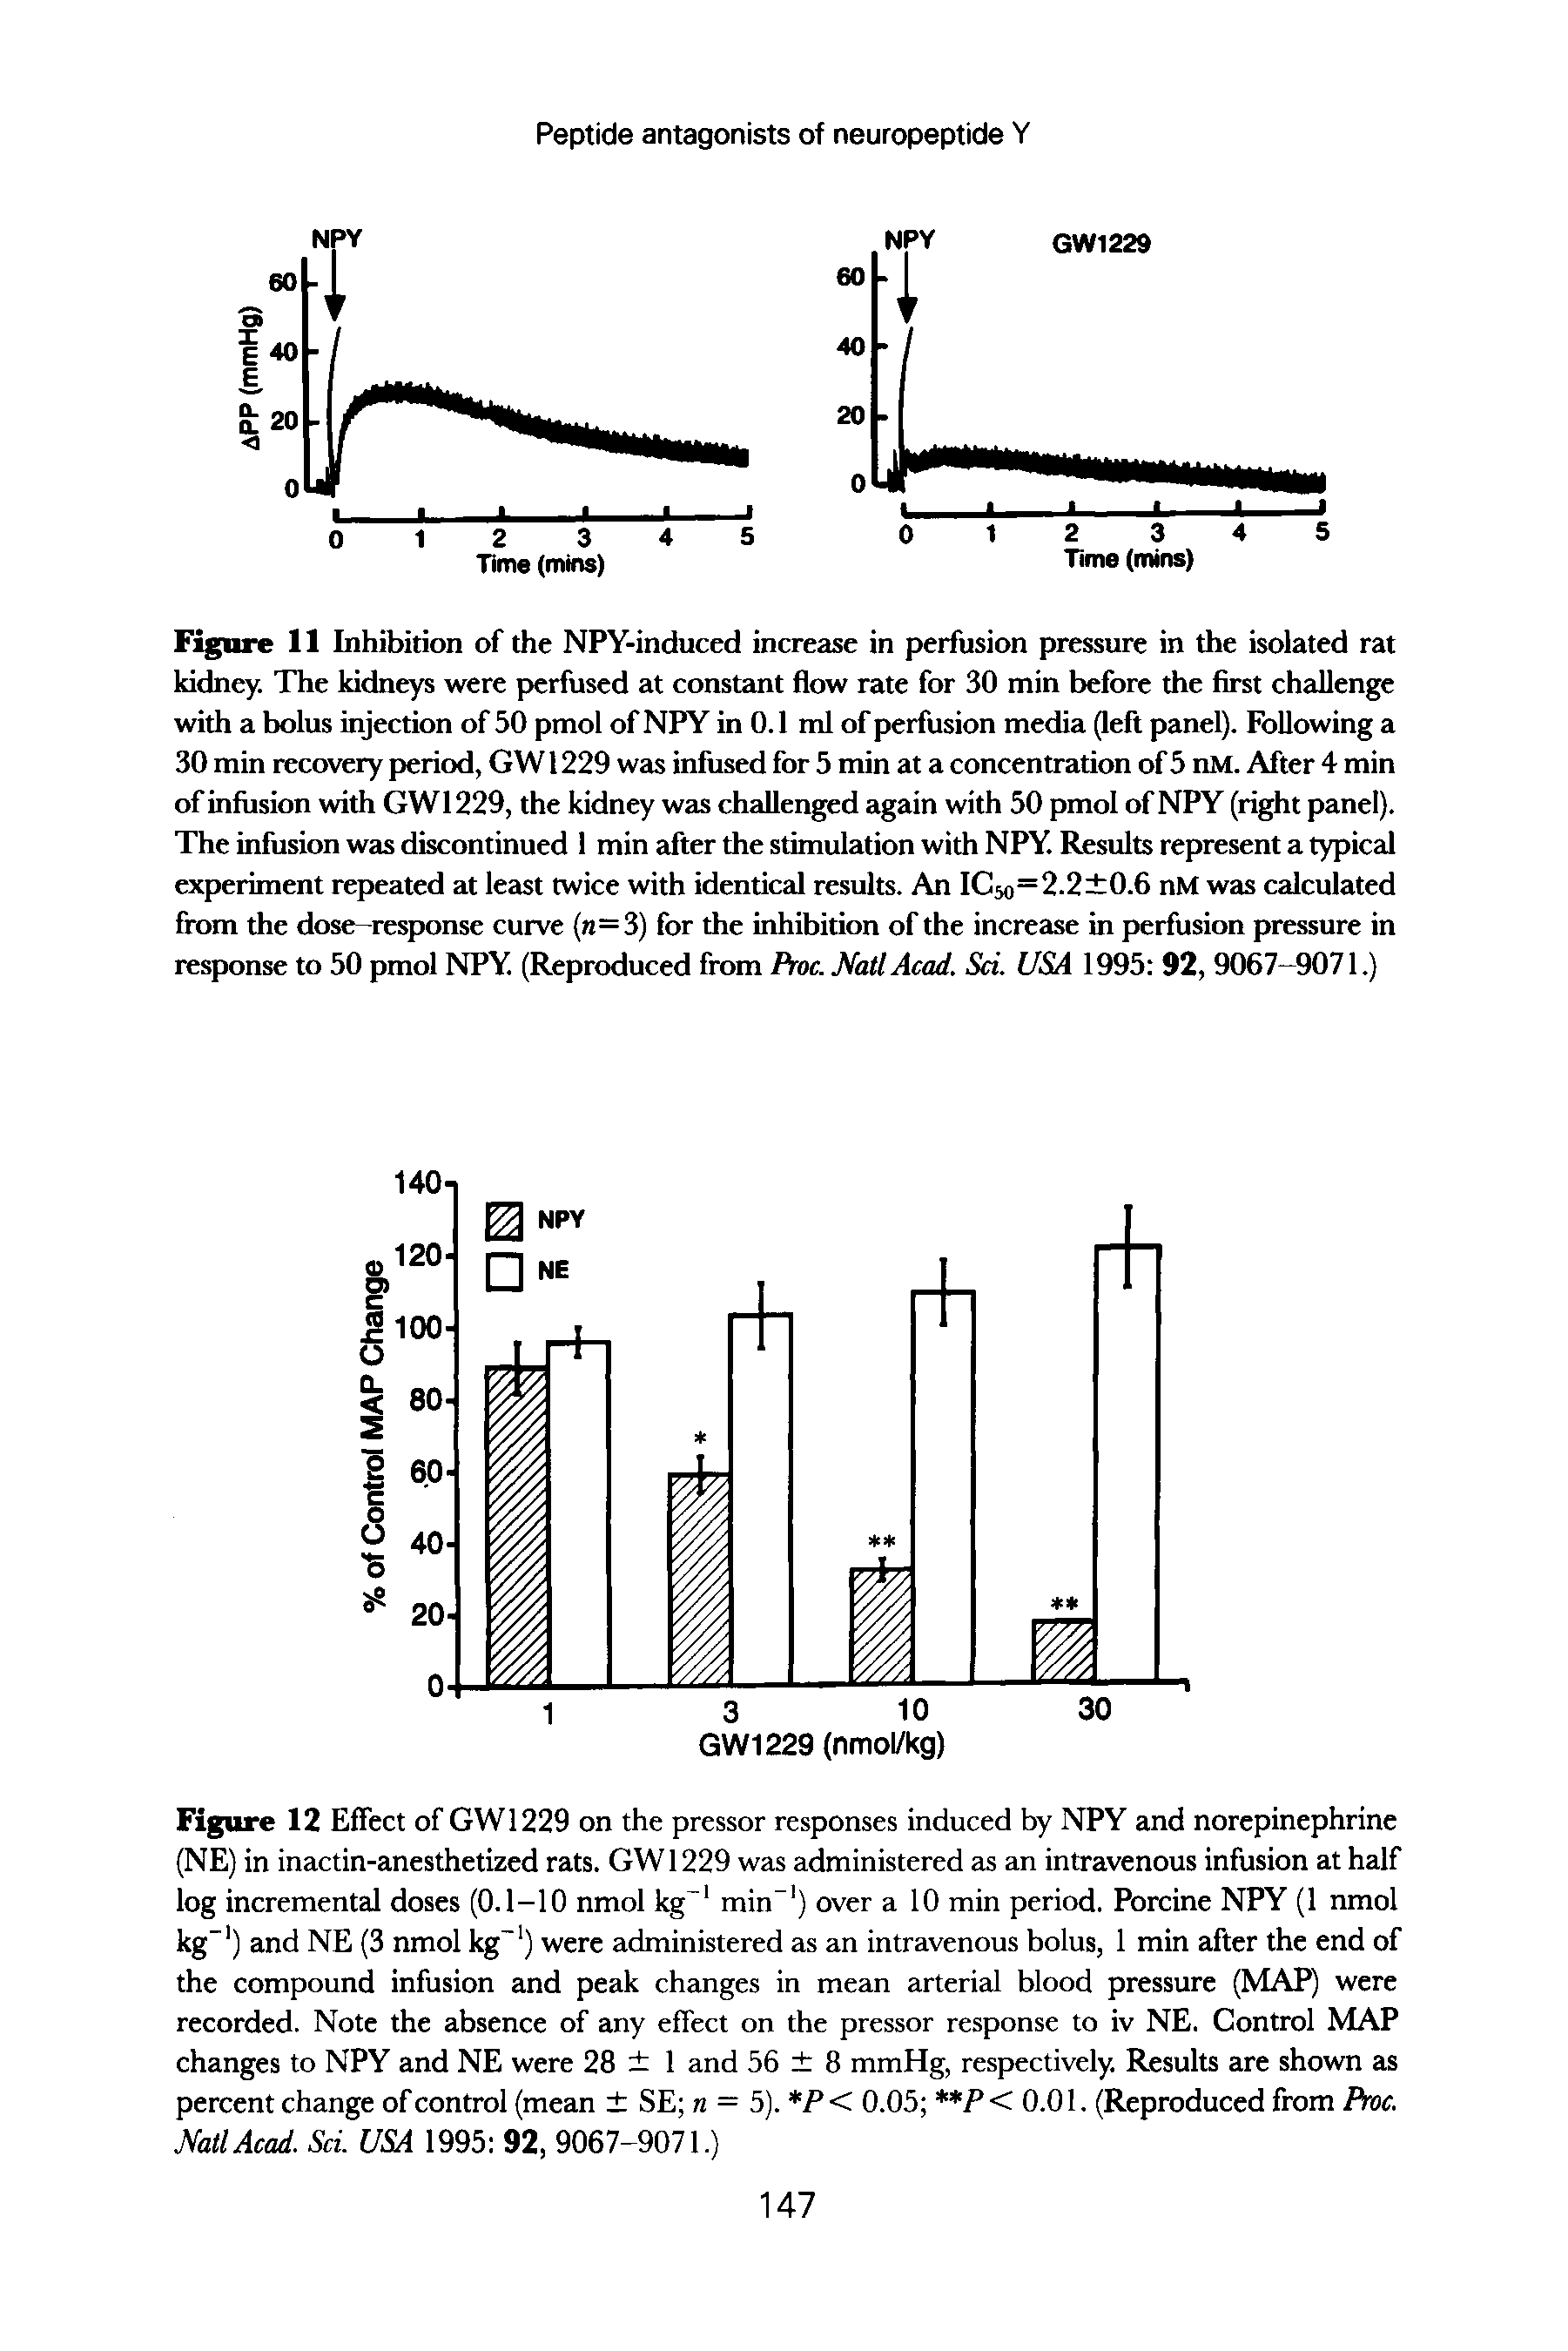 Figure 12 Effect of GW 1229 on the pressor responses induced by NPY and norepinephrine (NE) in inactin-anesthetized rats. GW 1229 was administered as an intravenous infusion at half log incremental doses (0.1-10 nmol kg 1 min-1) over a 10 min period. Porcine NPY (1 nmol kg-1) and NE (3 nmol kg-1) were administered as an intravenous bolus, 1 min after the end of the compound infusion and peak changes in mean arterial blood pressure (MAP) were recorded. Note the absence of any effect on the pressor response to iv NE. Control MAP changes to NPY and NE were 28 1 and 56 8 mmHg, respectively. Results are shown as percent change of control (mean SE n = 5). P< 0.05 P< 0.01. (Reproduced from Proc. Natl Acad. Sci. USA 1995 92, 9067-9071.)...